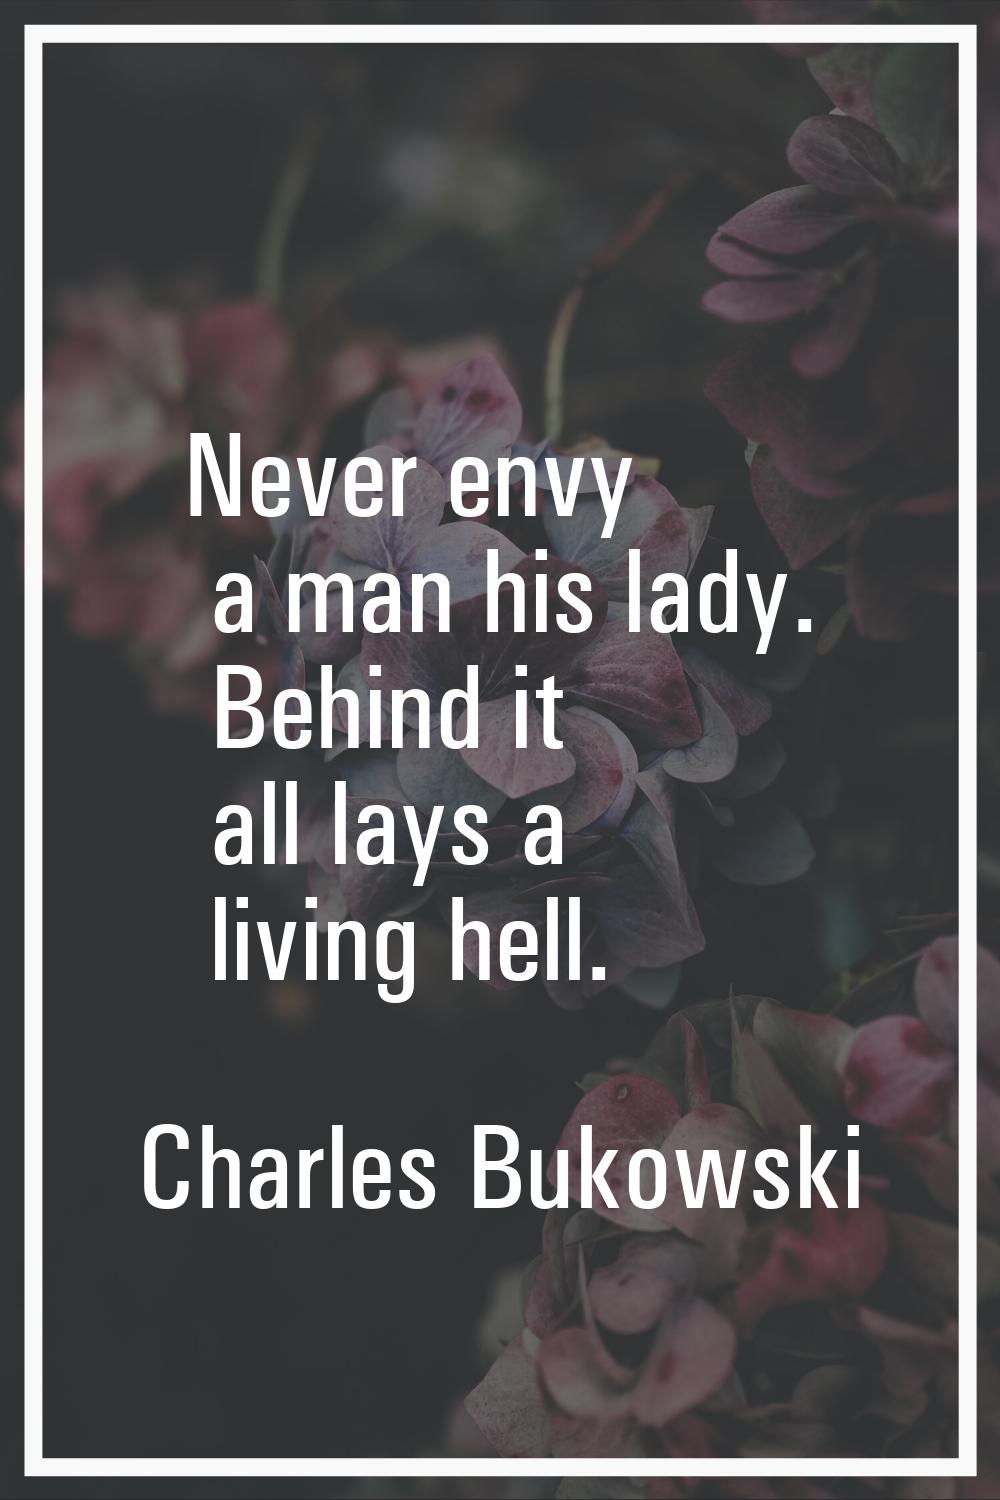 Never envy a man his lady. Behind it all lays a living hell.